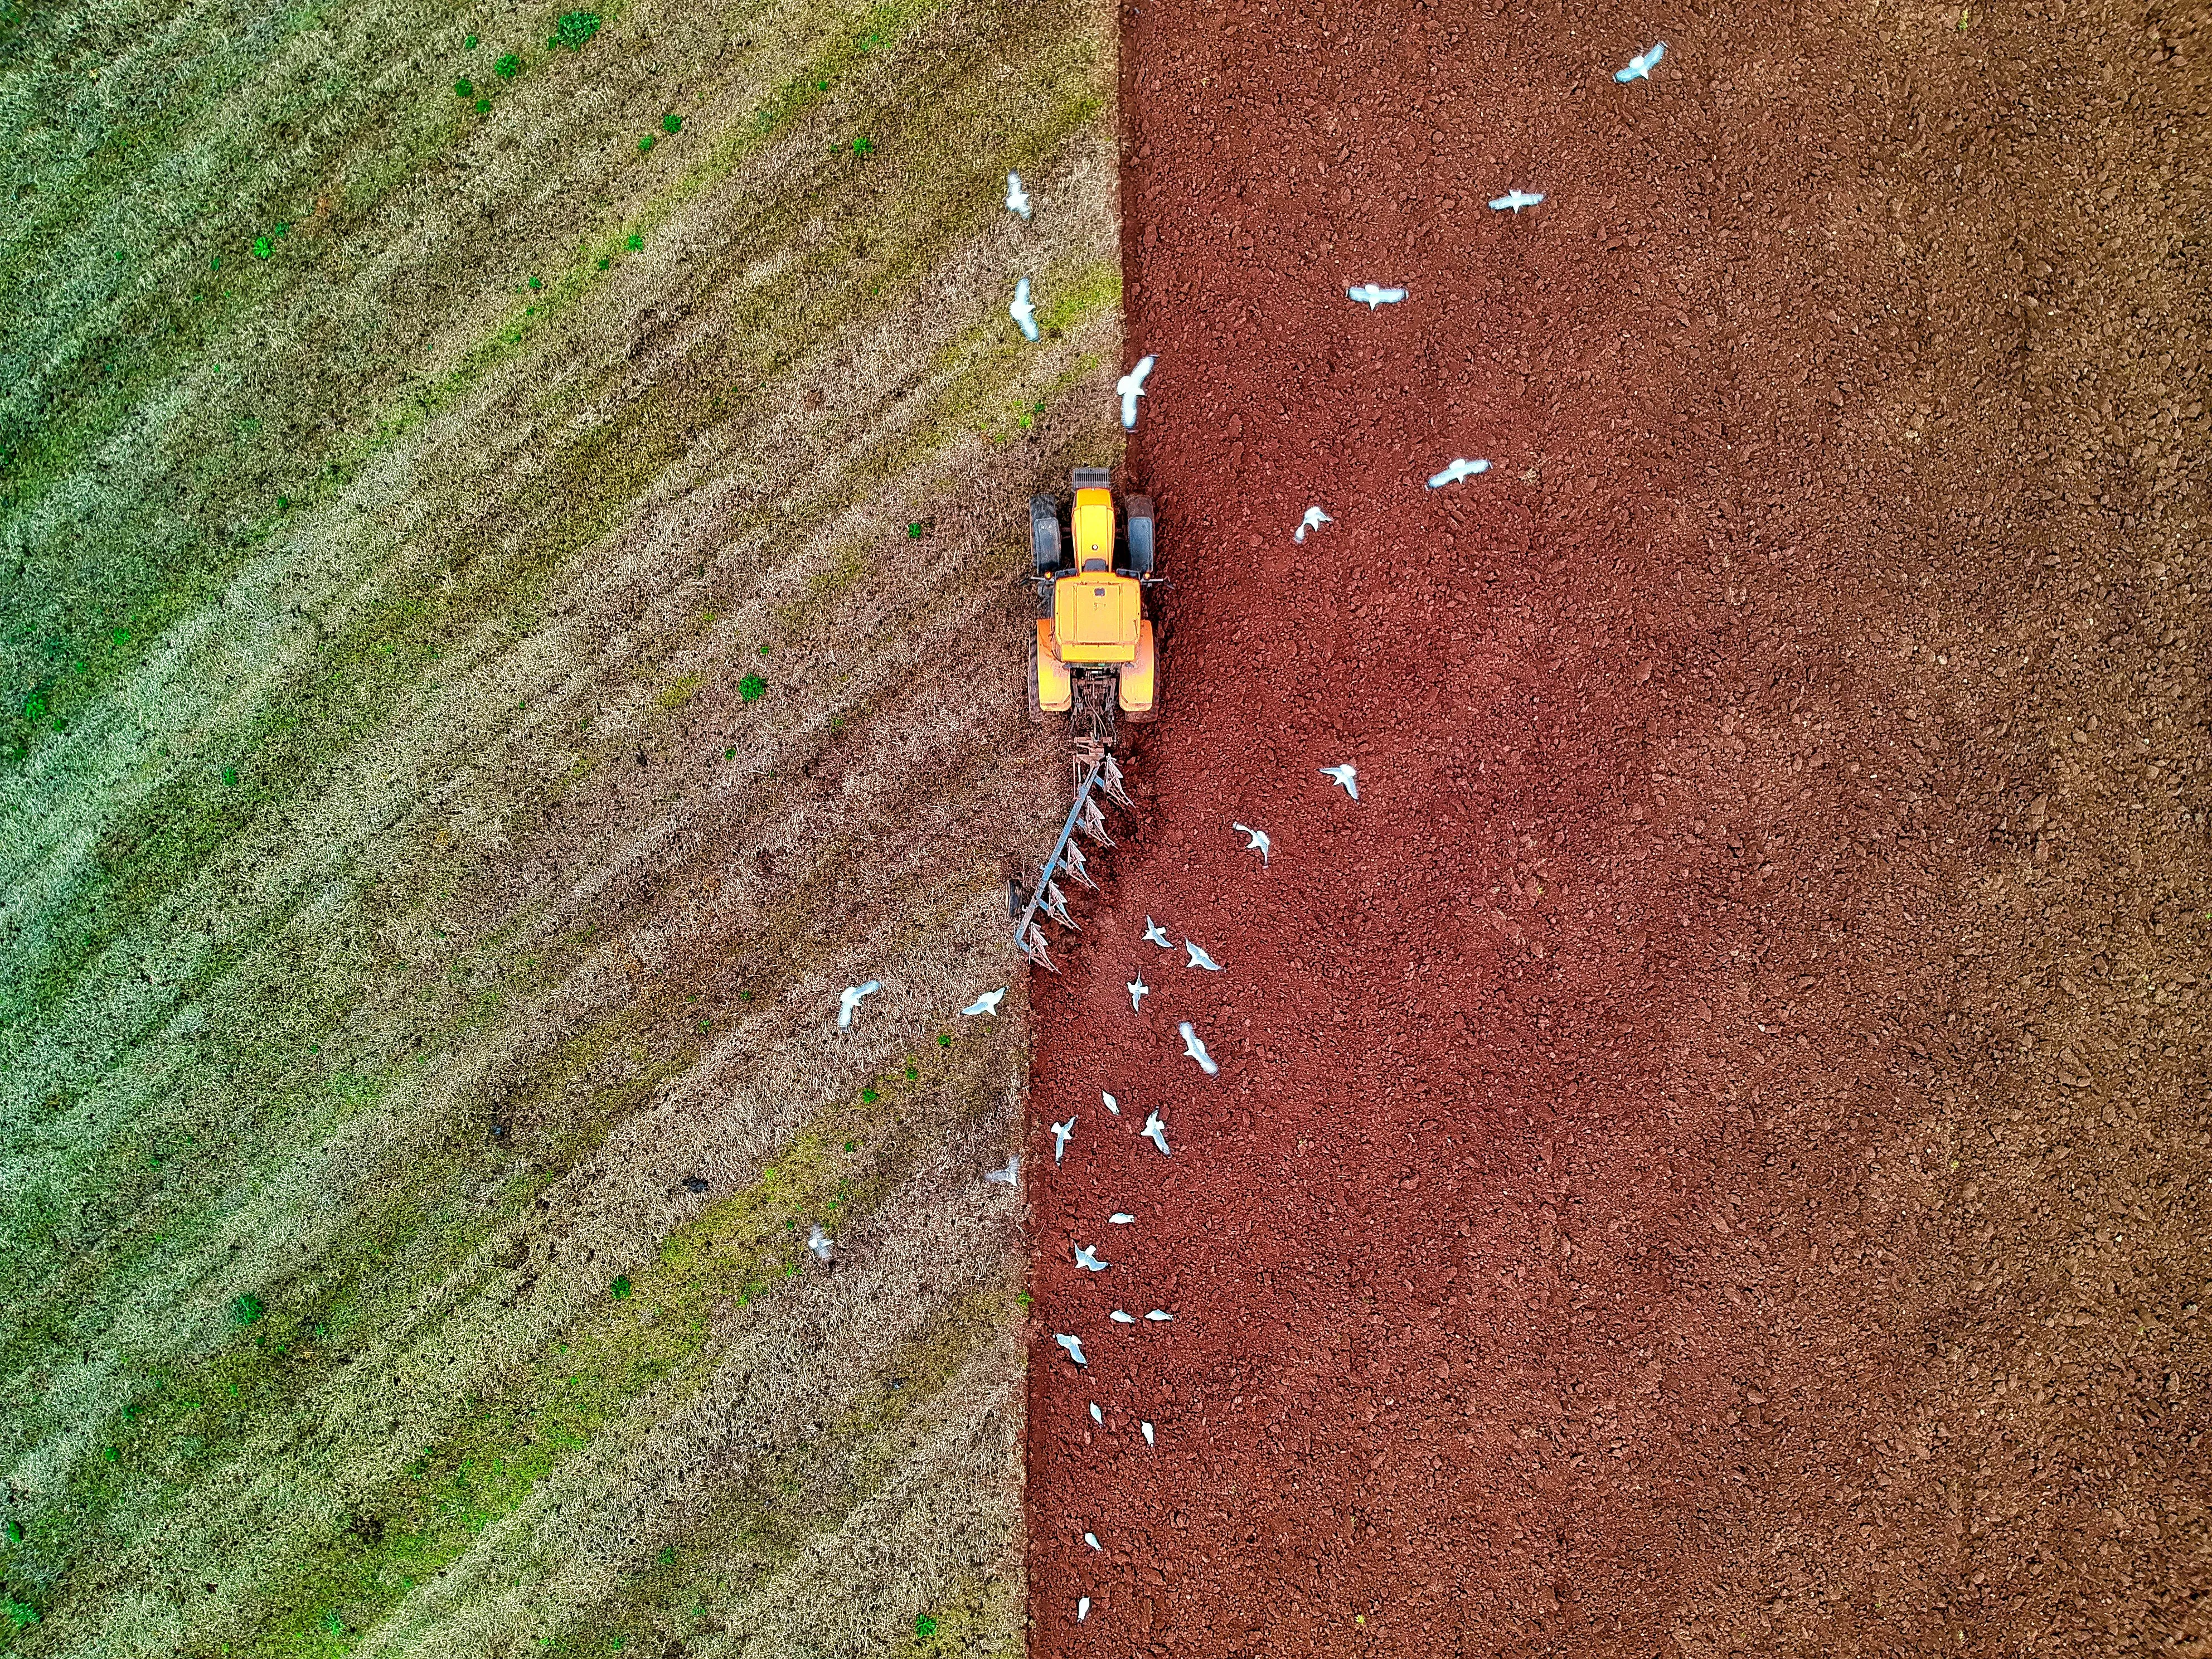 Aerial view of a yellow tractor ploughing a field